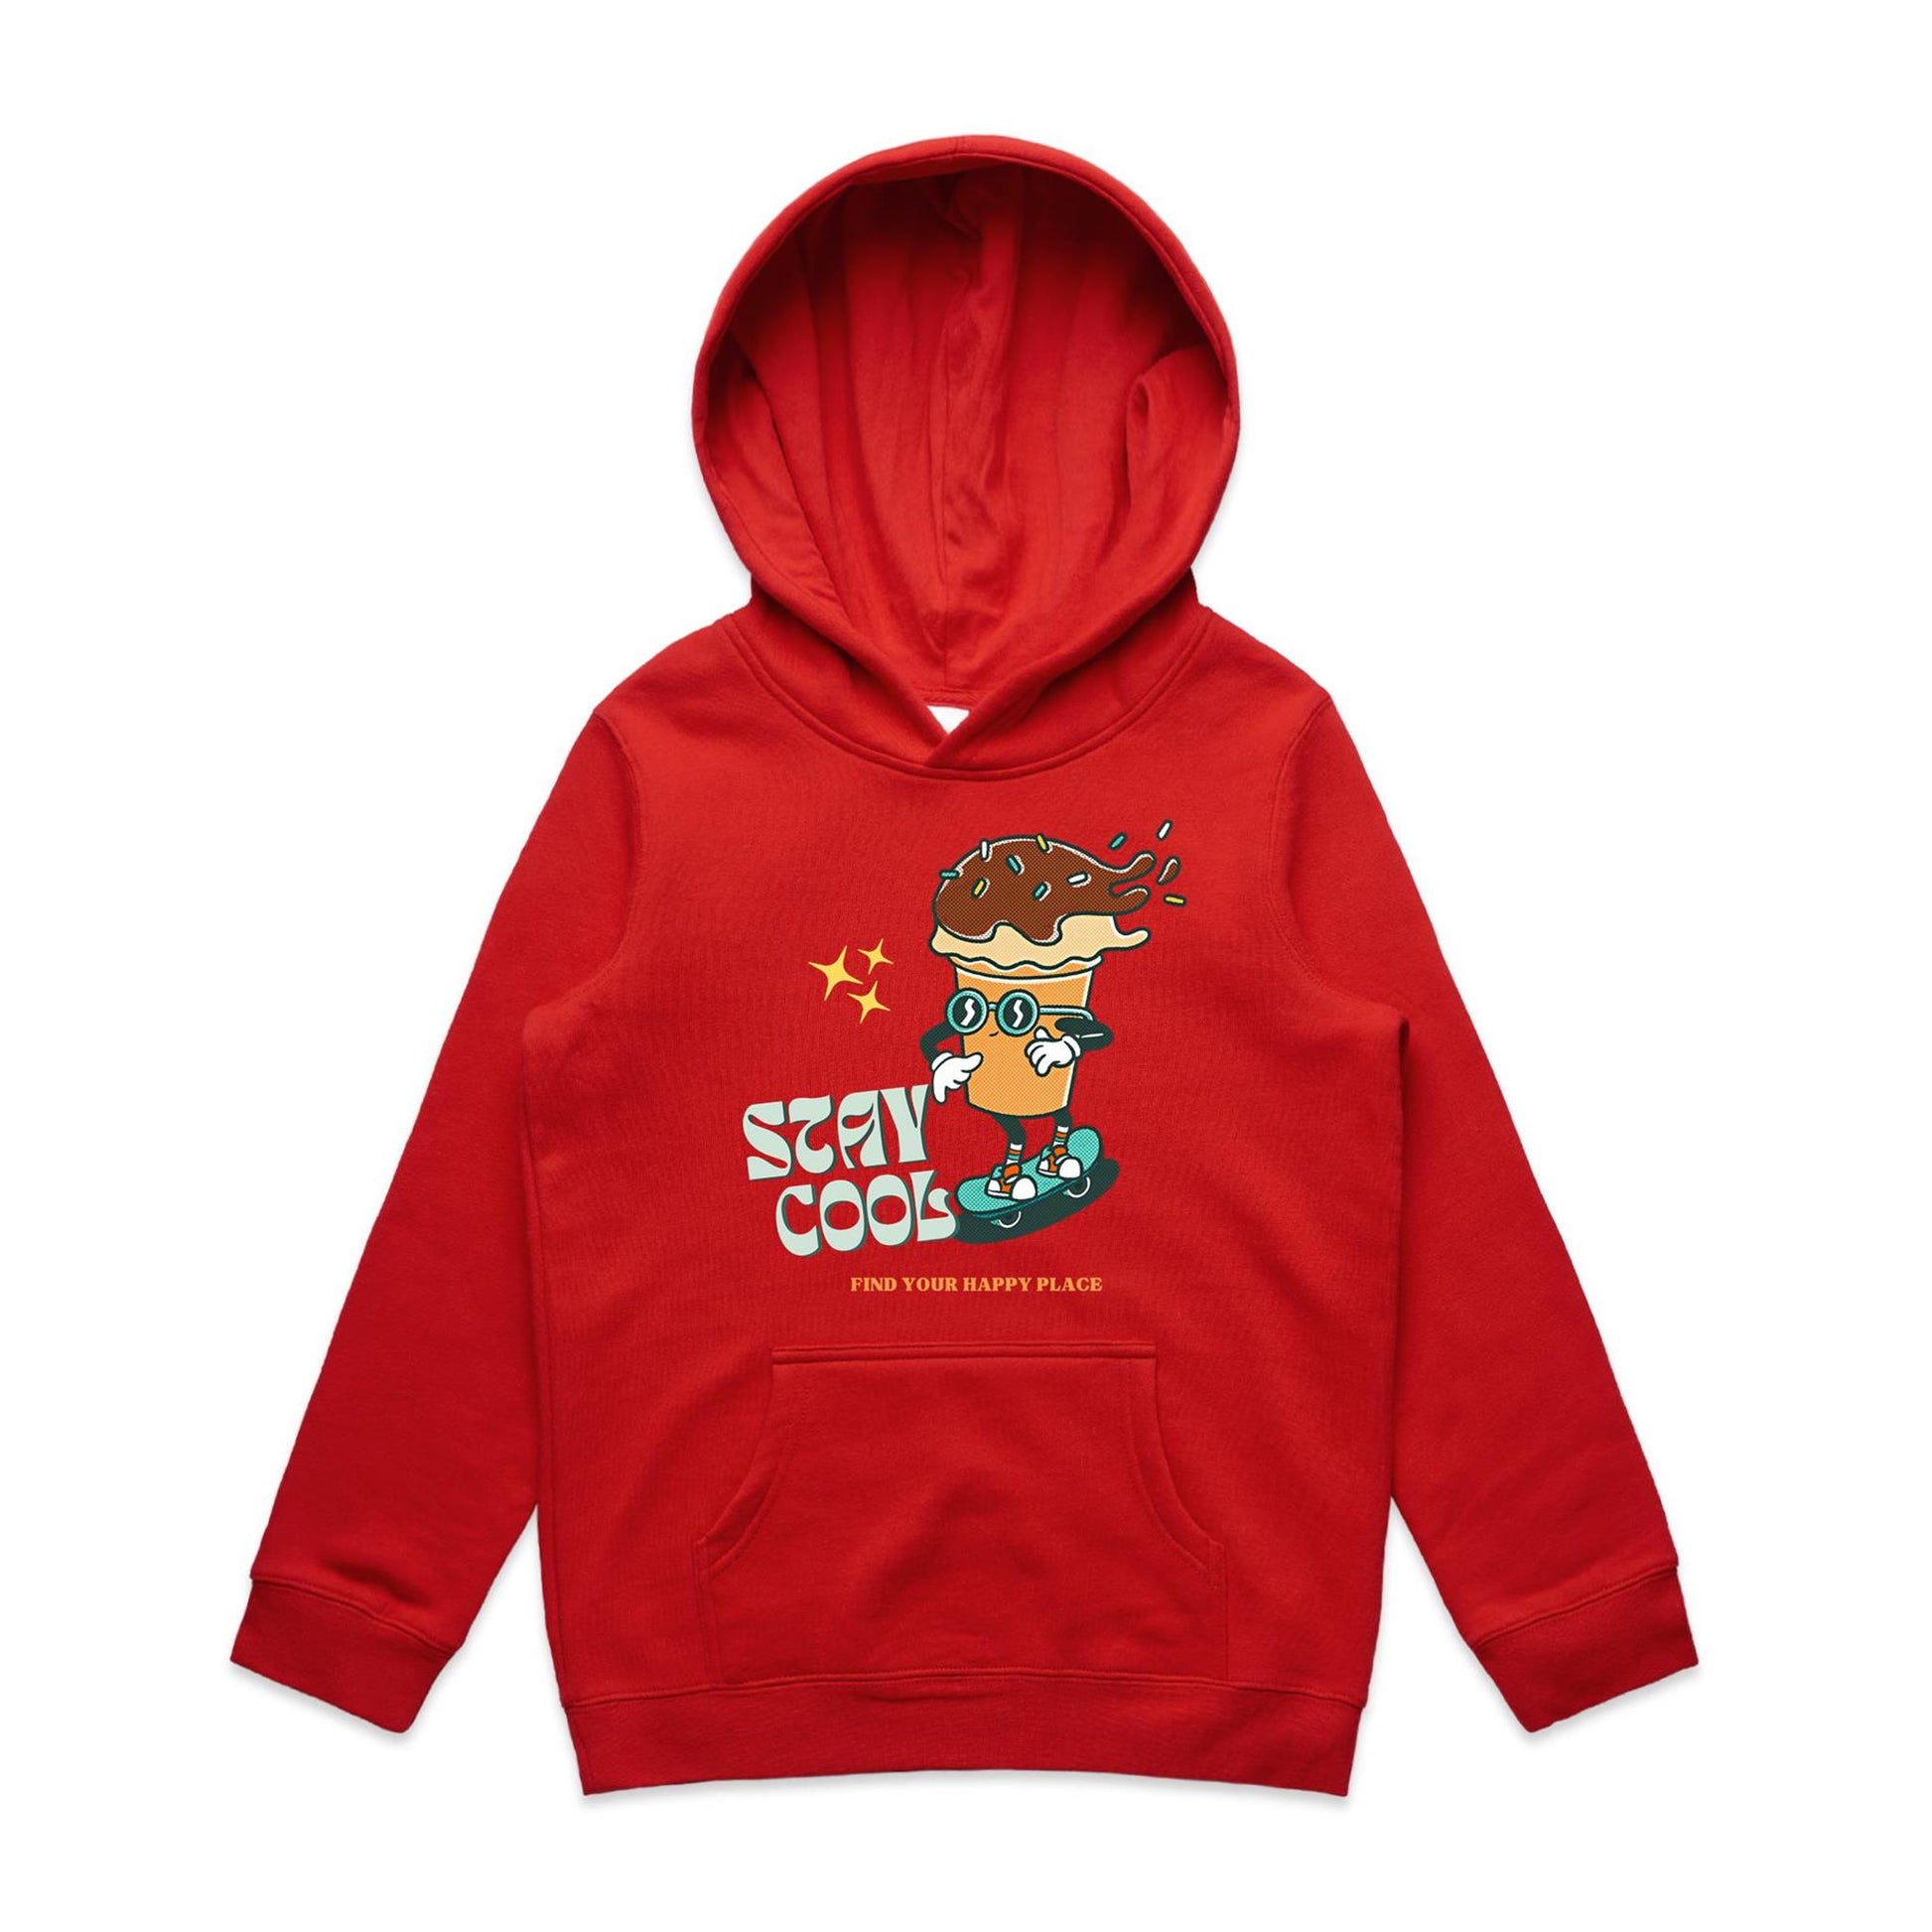 Ice Cream, Stay Cool - Youth Supply Hood Red Kids Hoodie